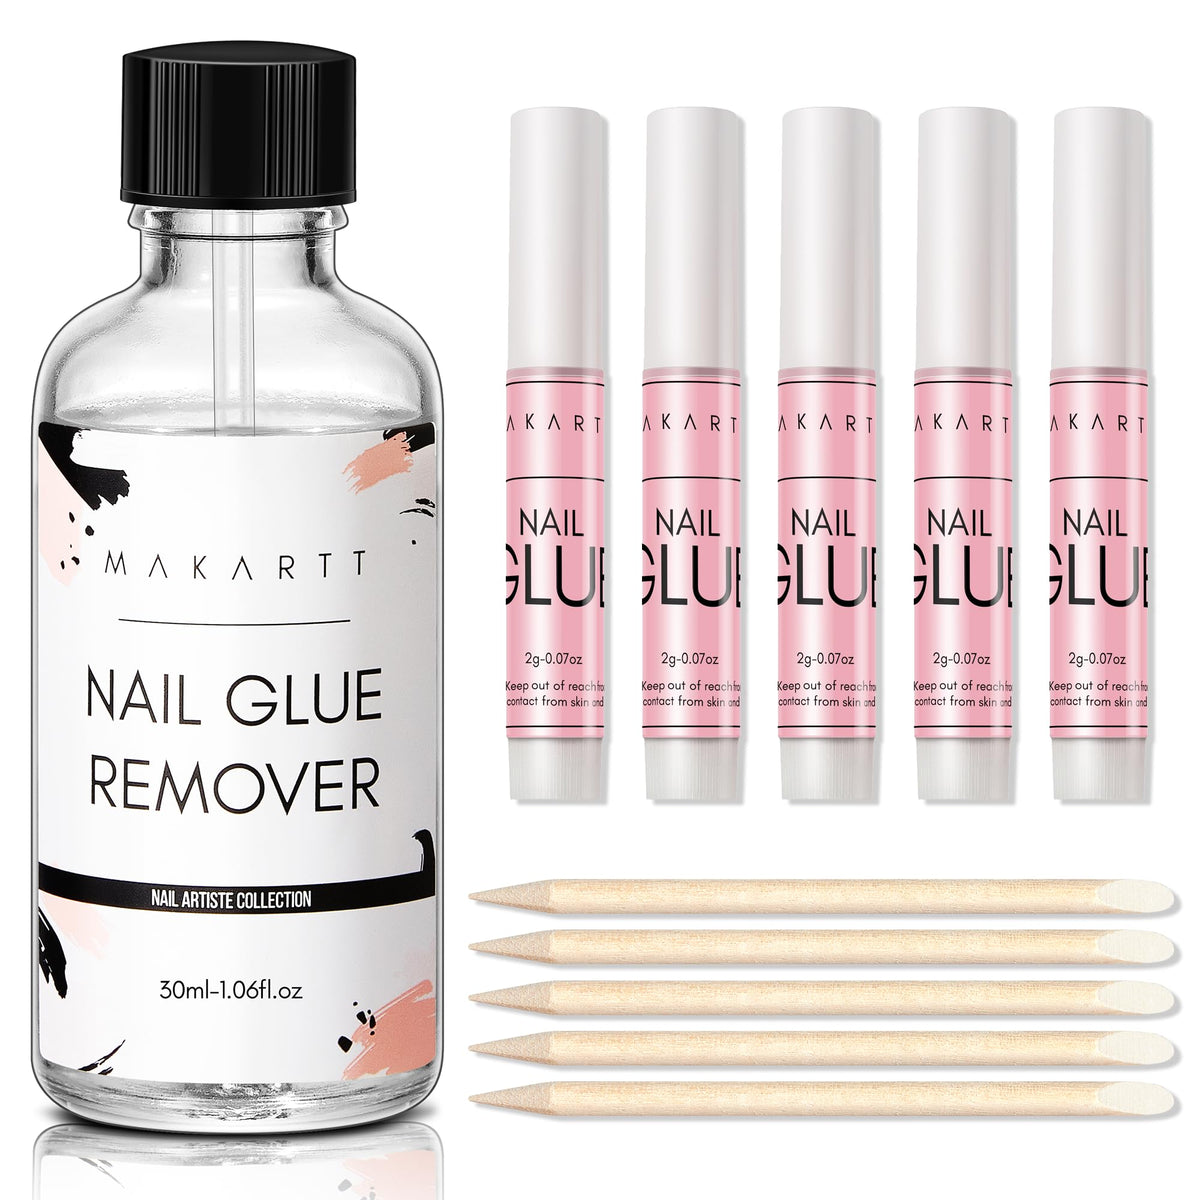 Super Strong Nail Glue with Glue Remover Kit